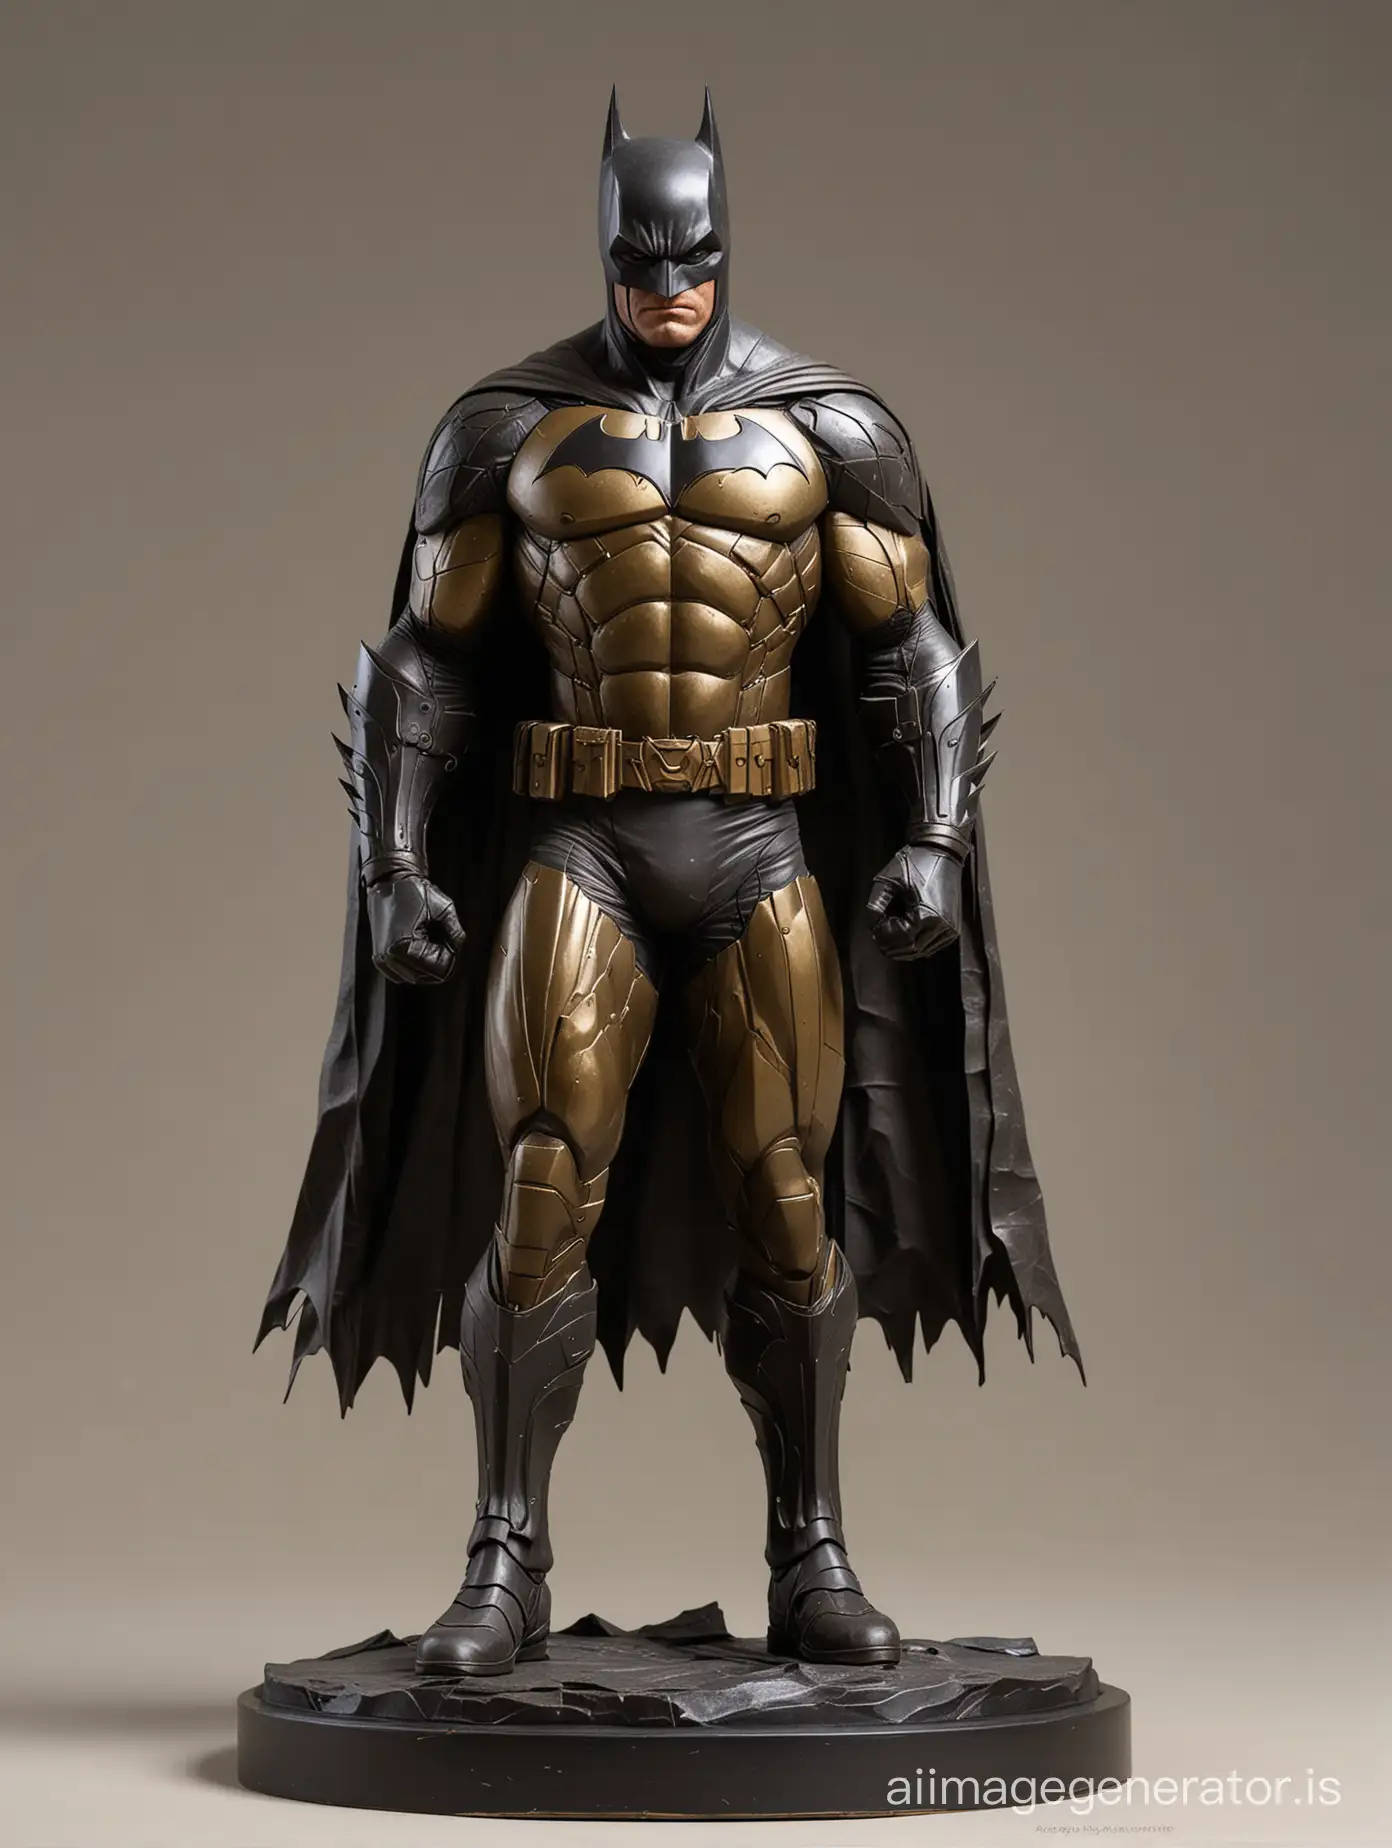  image of minimalist style batman sculpture, showing the dynamic posture of the character, designed by a famous sculptor, using brass, bronze and other metal materials, needs a retro feel, showing the brushstrokes of a carving knife, modern minimalist style, combining abstraction and realism, the ultimate detailed design, award-winning work, showing excellent texture and details, setting is a museum exhibit.